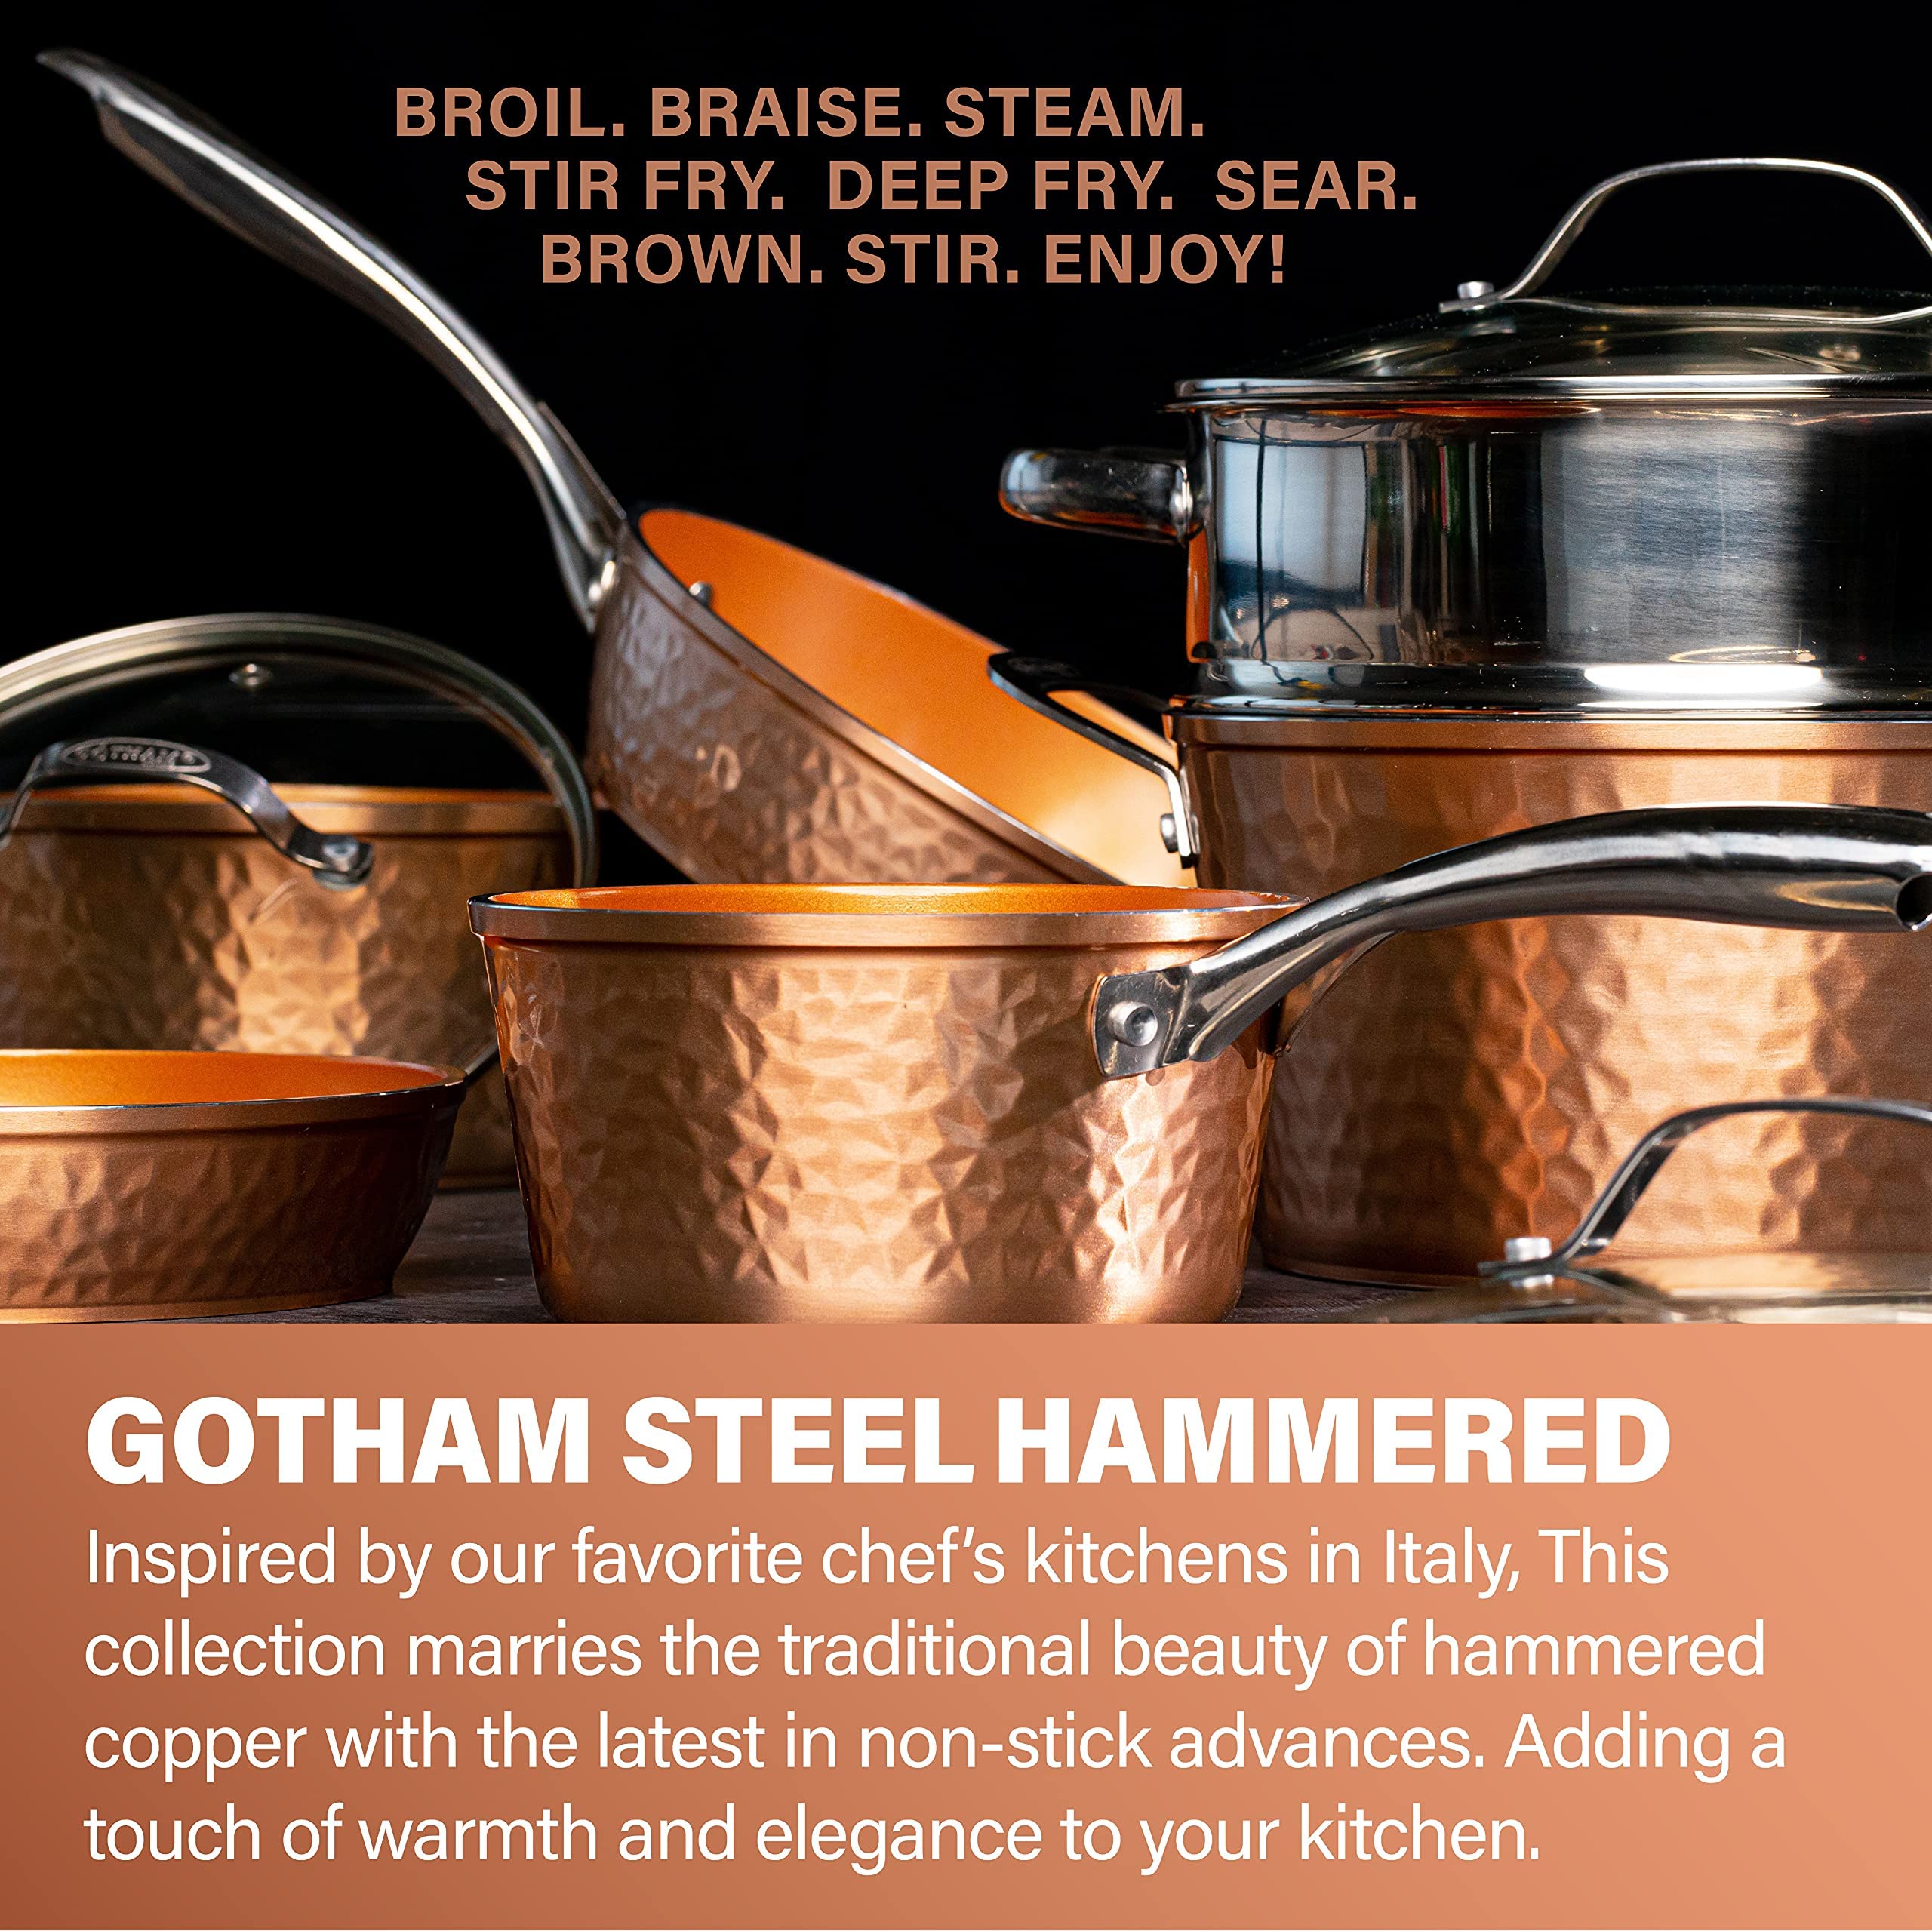 GOTHAM STEEL Hammered Non Stick Frying Pan with Lid, 14” Ceramic Frying Pan Nonstick, Induction Pan for Cooking, Long Lasting Nonstick, 100% Toxin Free & Gotham Steel Hammered Copper Collection